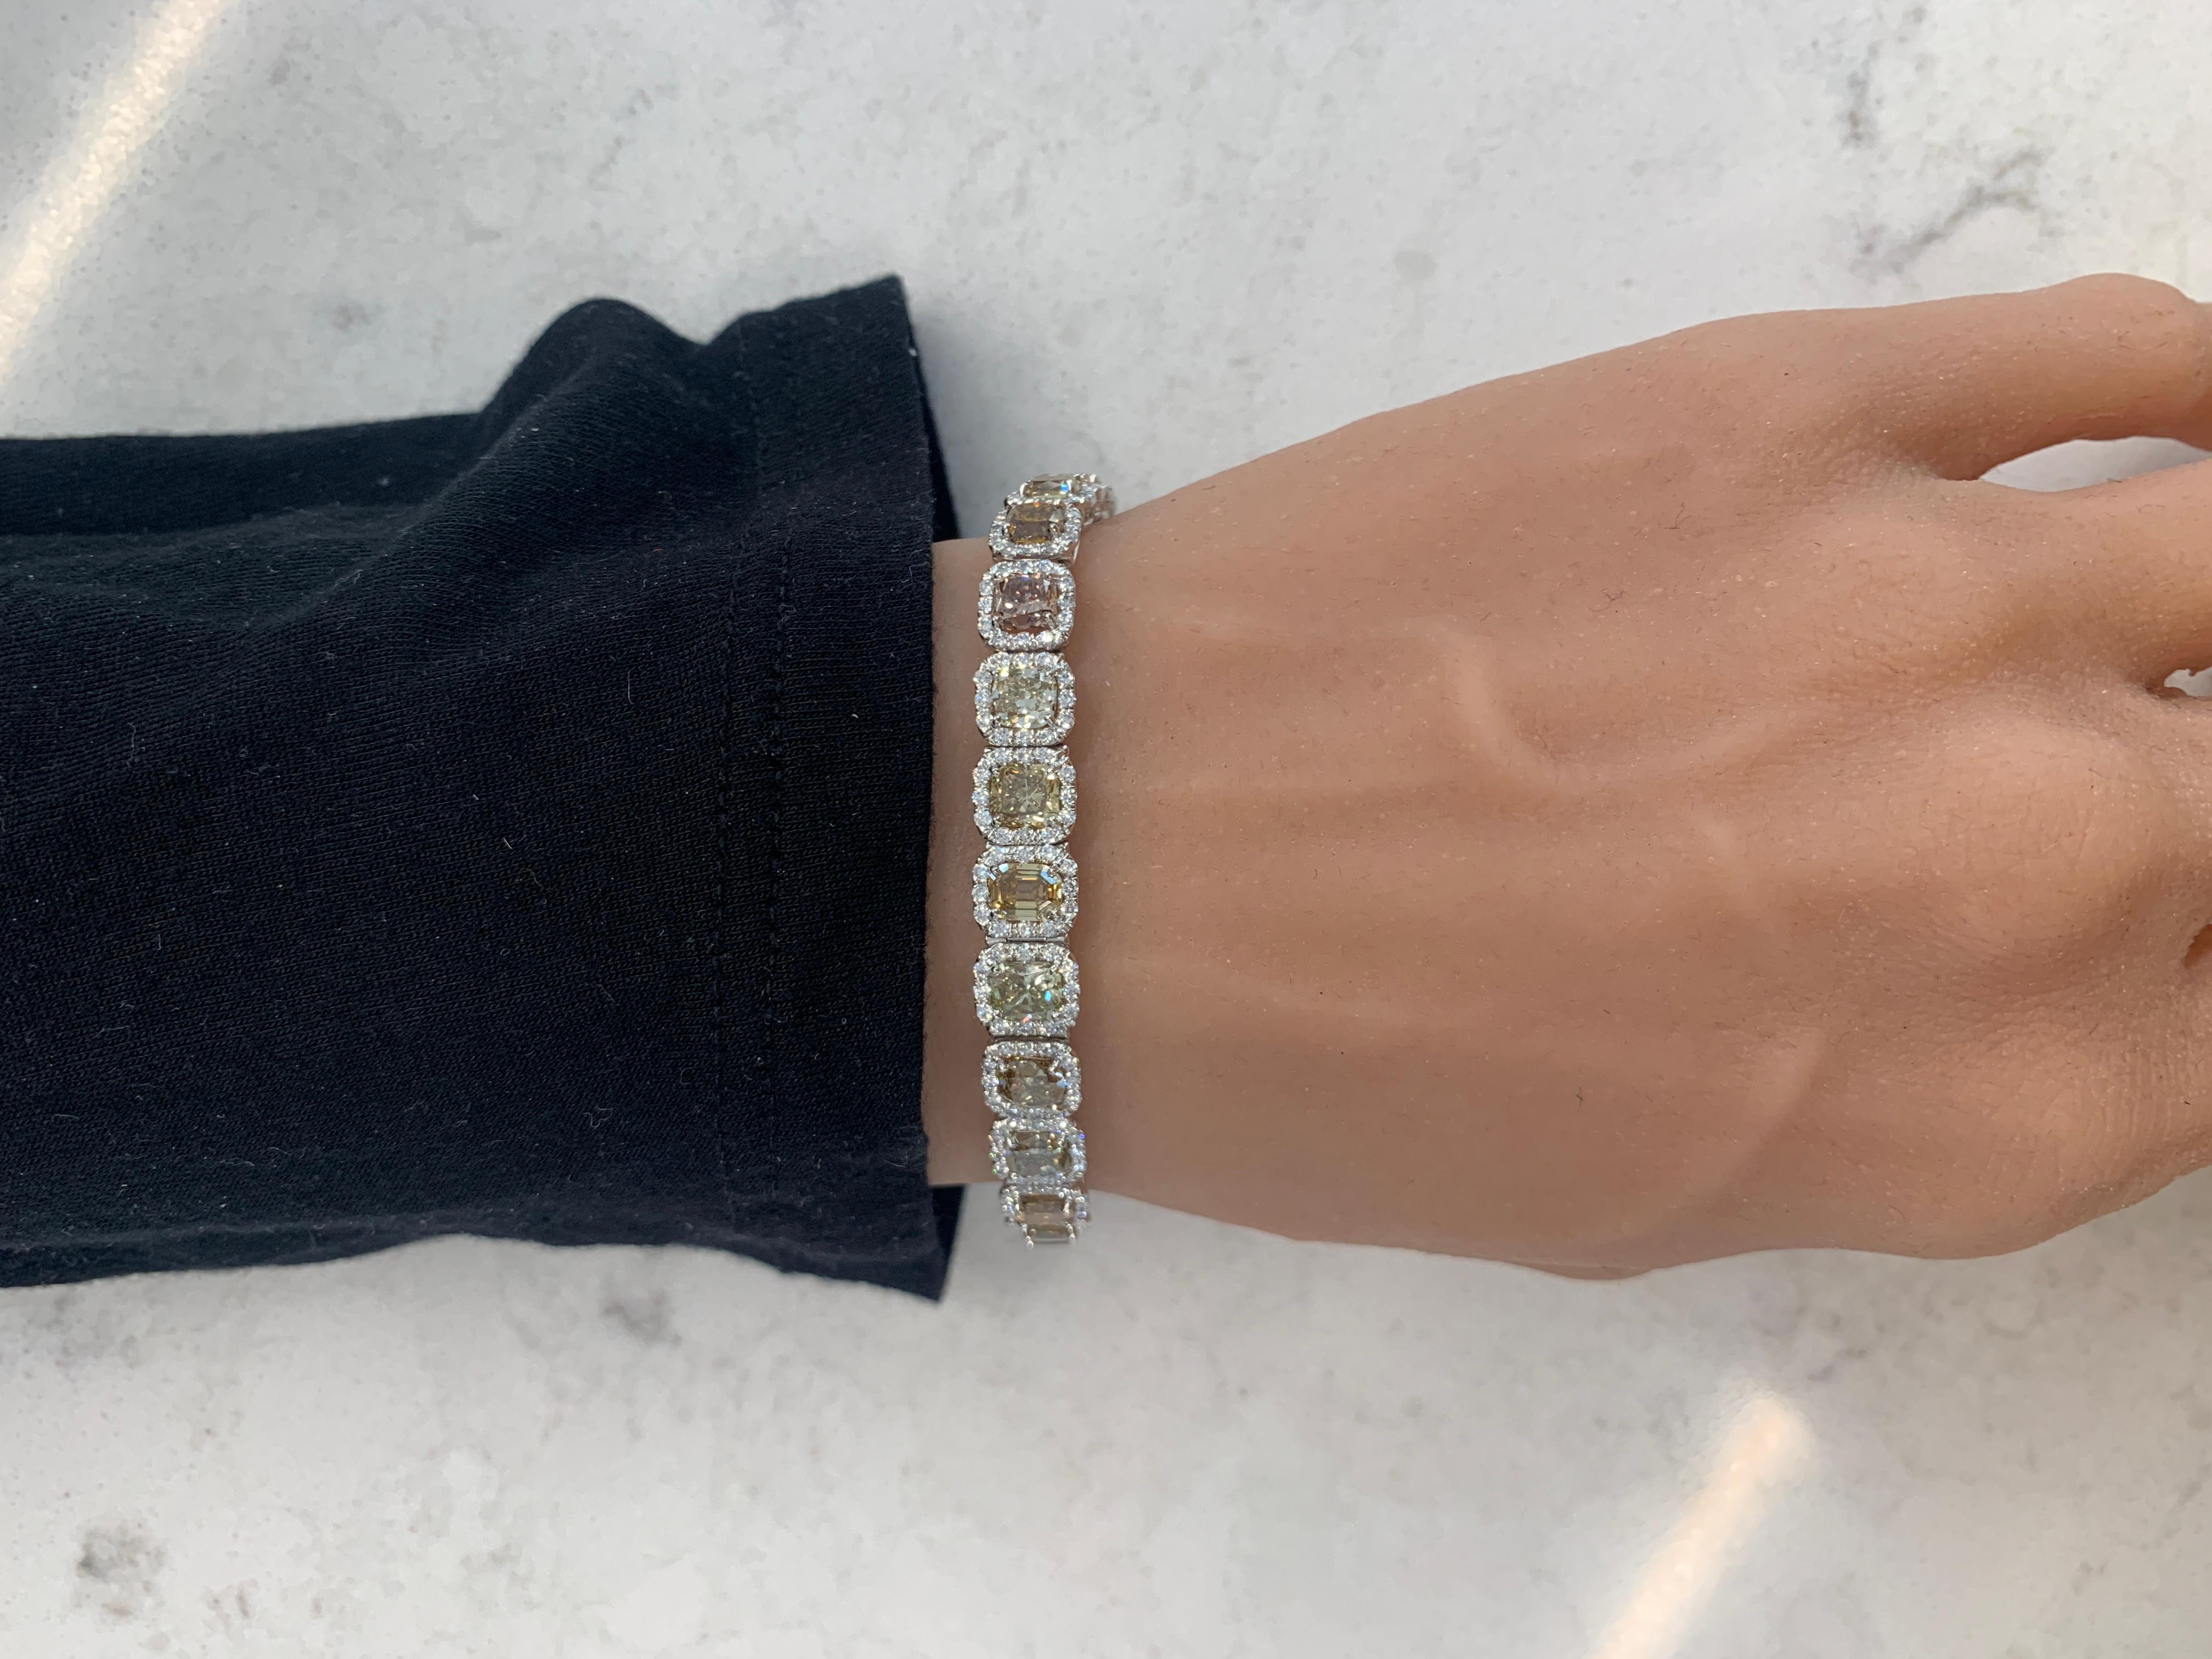 This bracelet consists of 27 fancy cushion cut diamonds that total upto 15.40 carats. It also consists of natural round diamonds that total up to 3.30 carats. And is 7.25 inches in length and set in platinum.